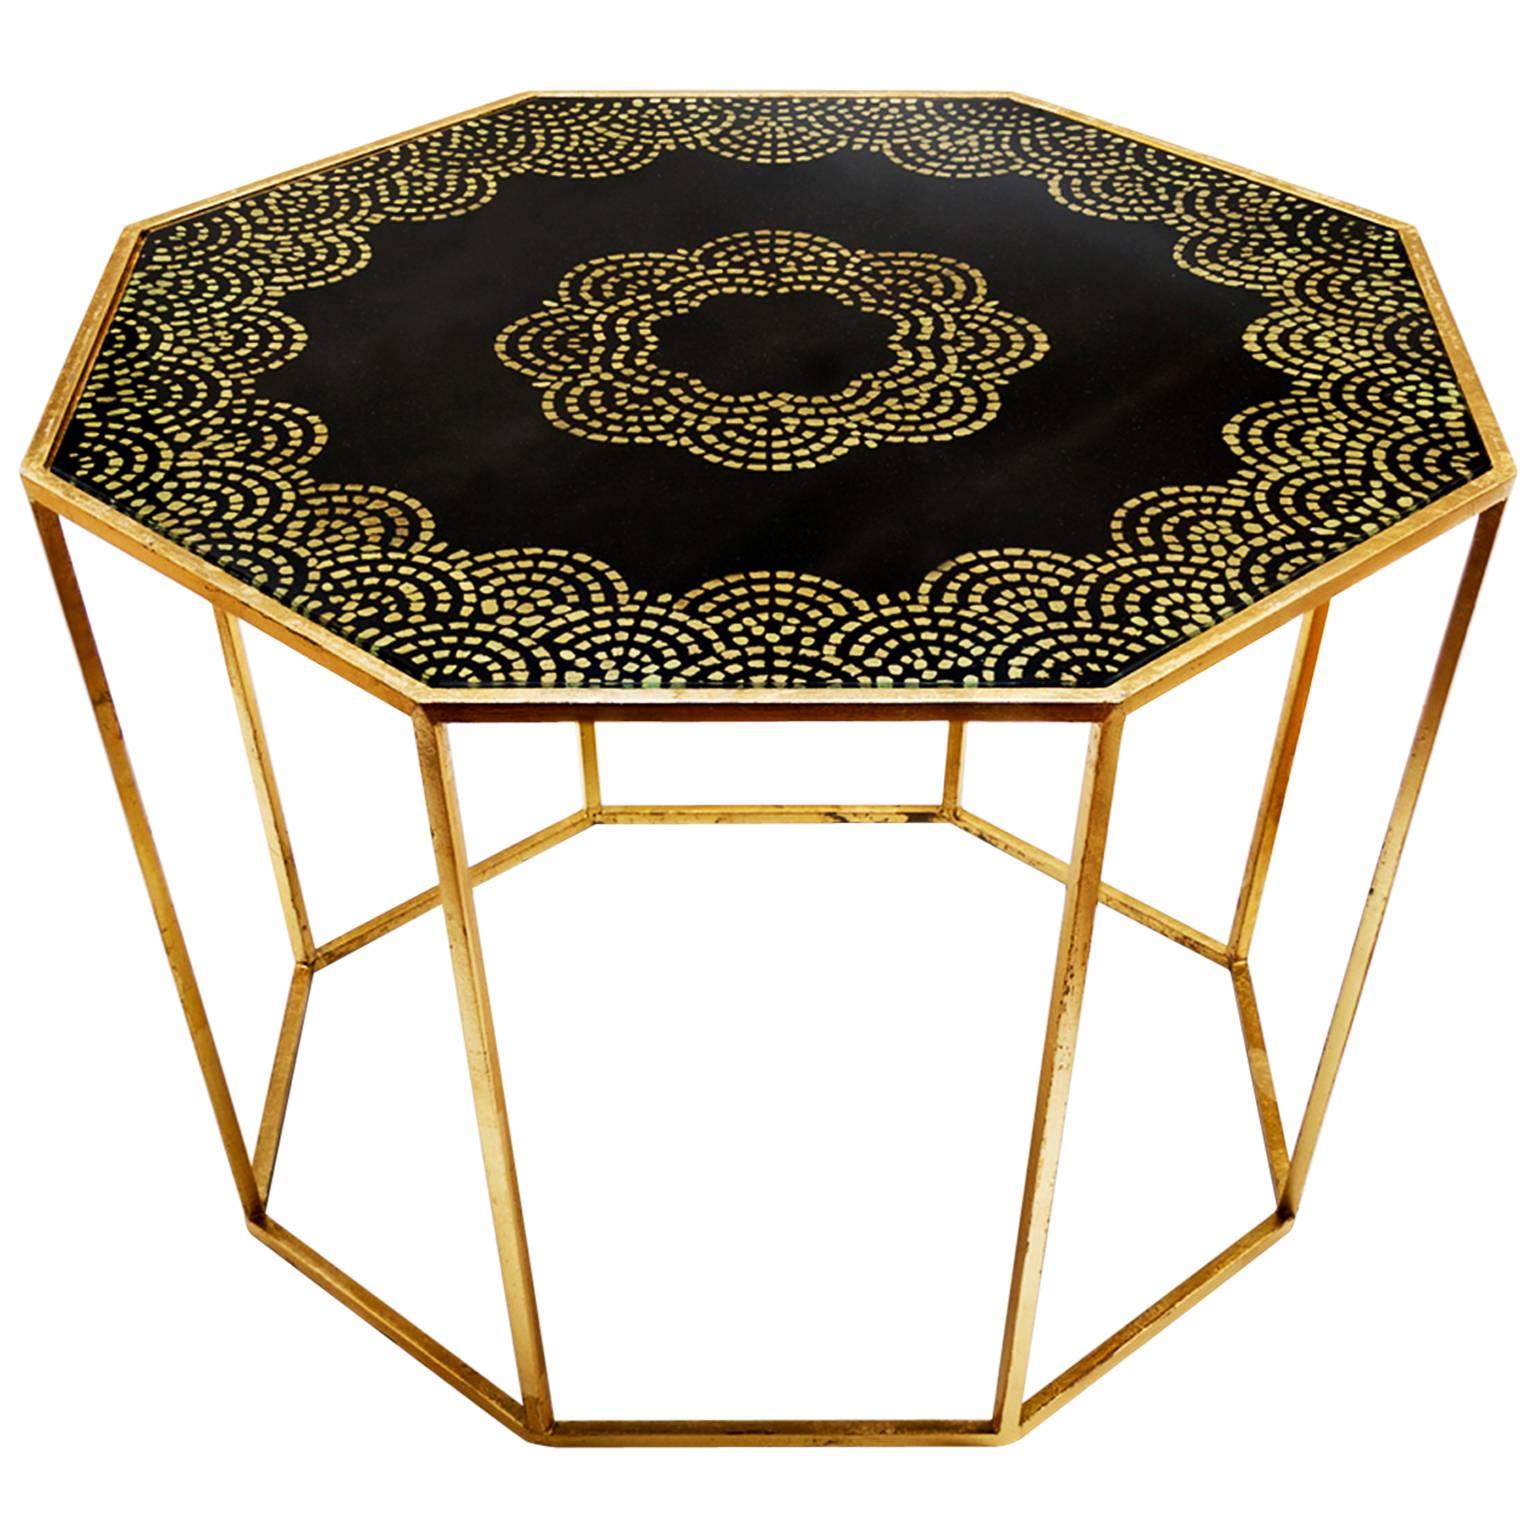 Hand-Painted Gold Leaf Octagonal Table For Sale